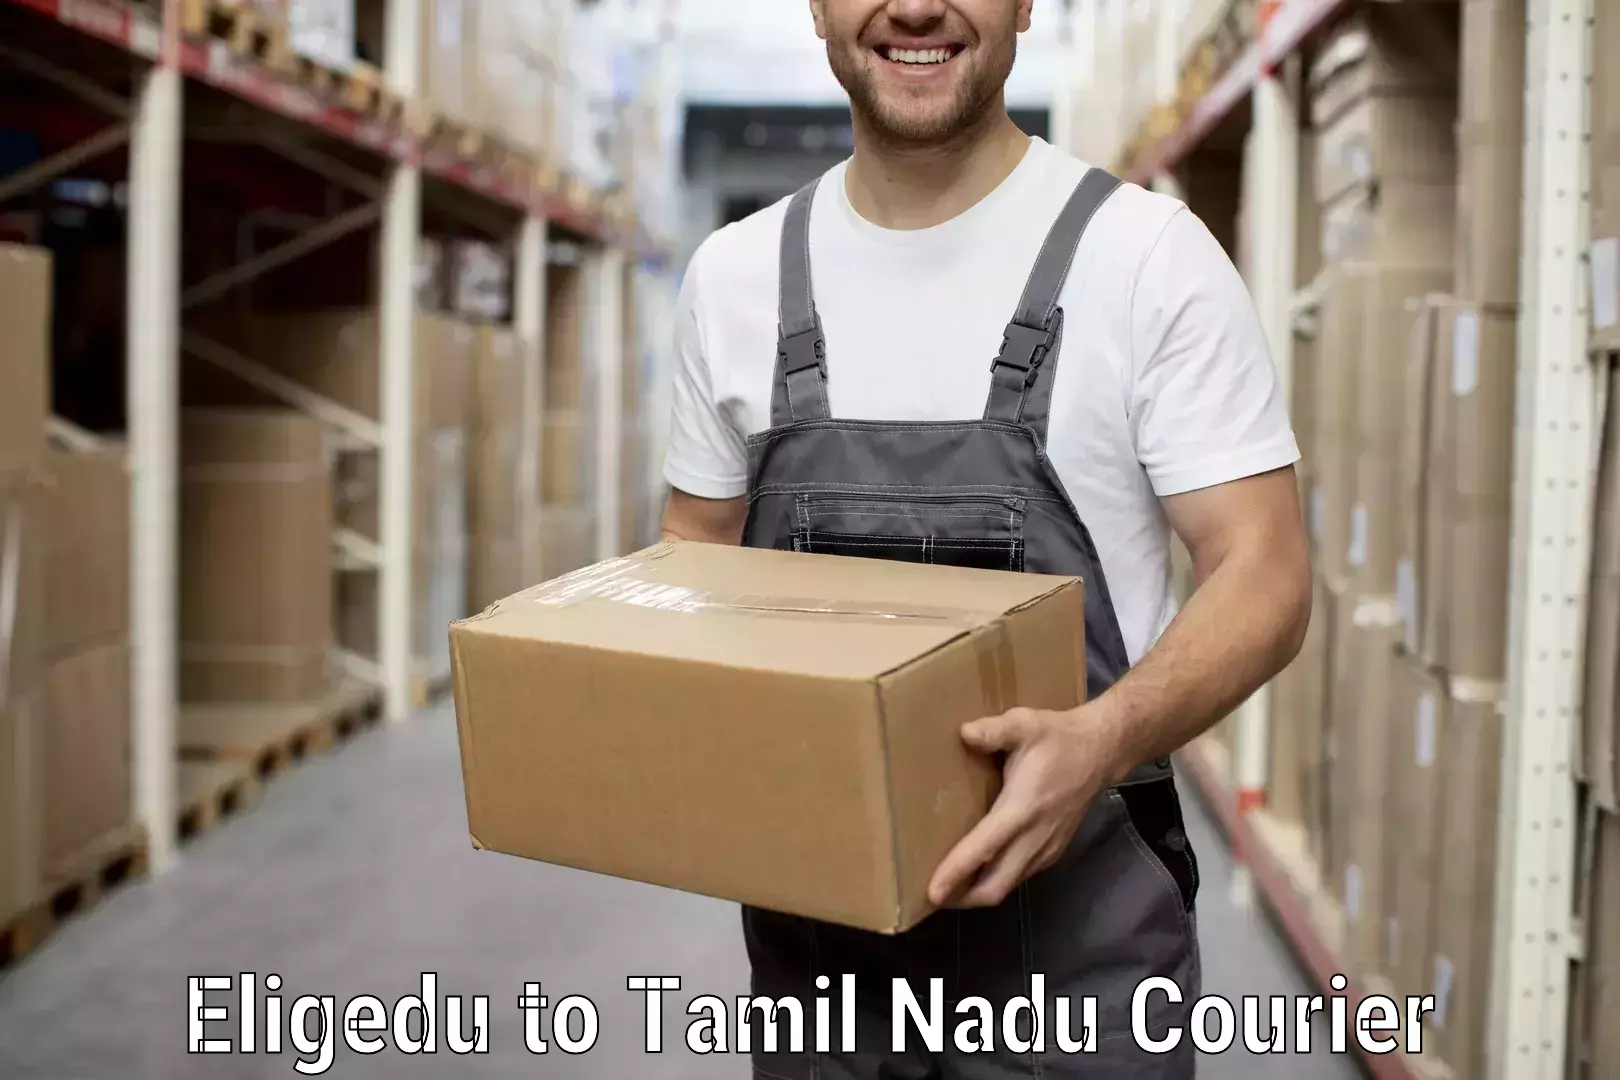 Budget-friendly movers Eligedu to Tirupur